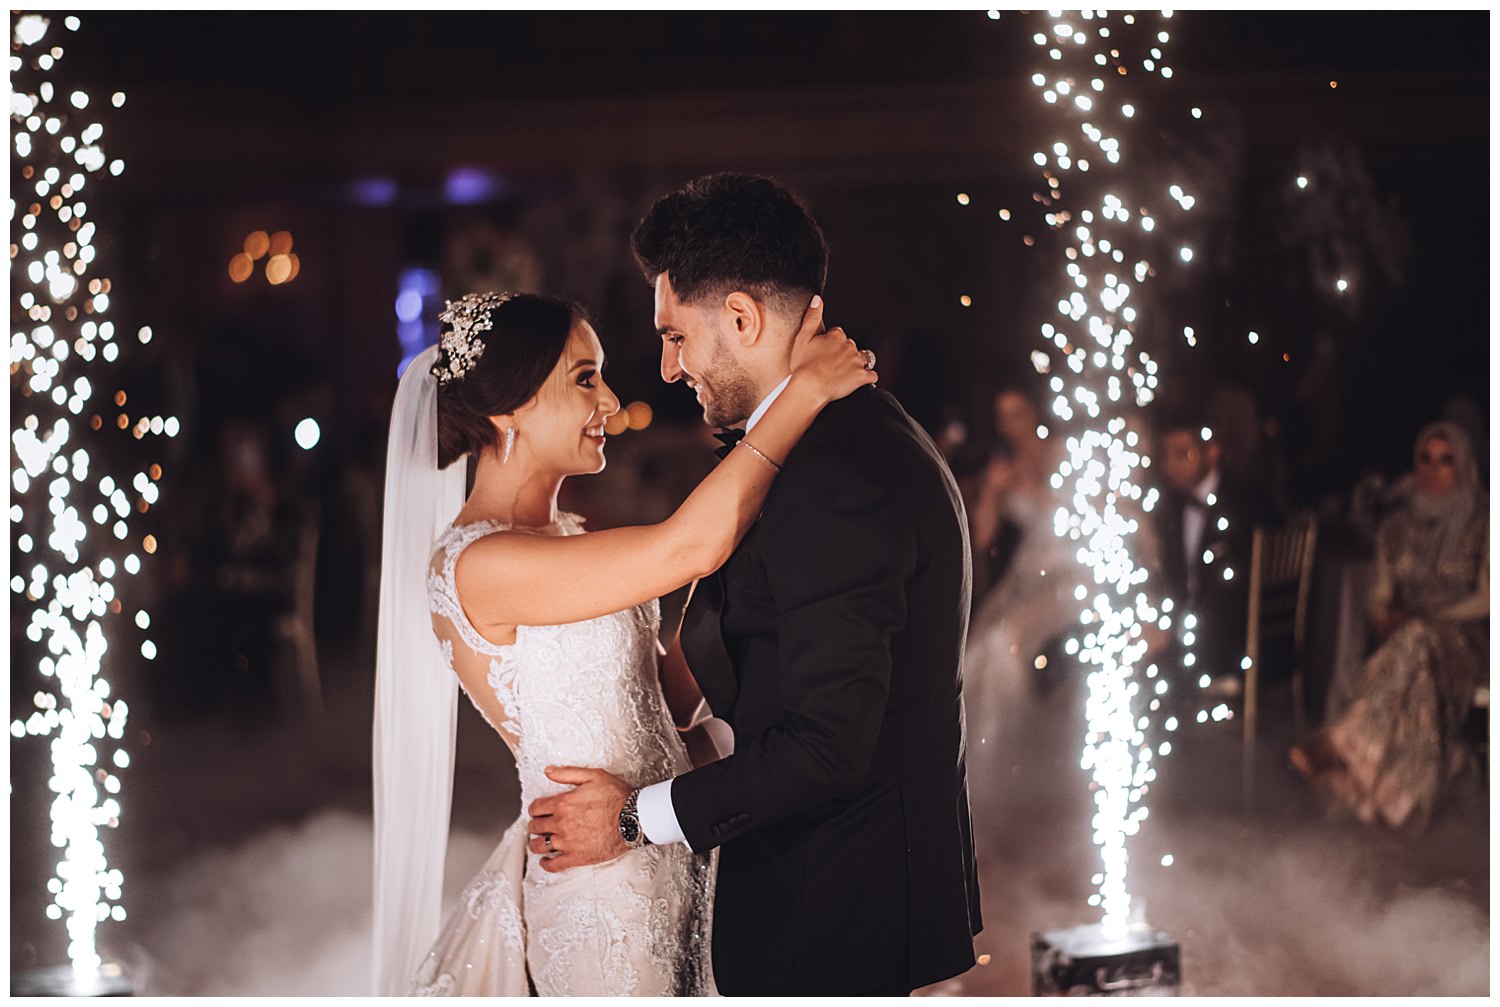 Arabic wedding Palmer house chicago, zsmoke and fireworks, sparklers first dance